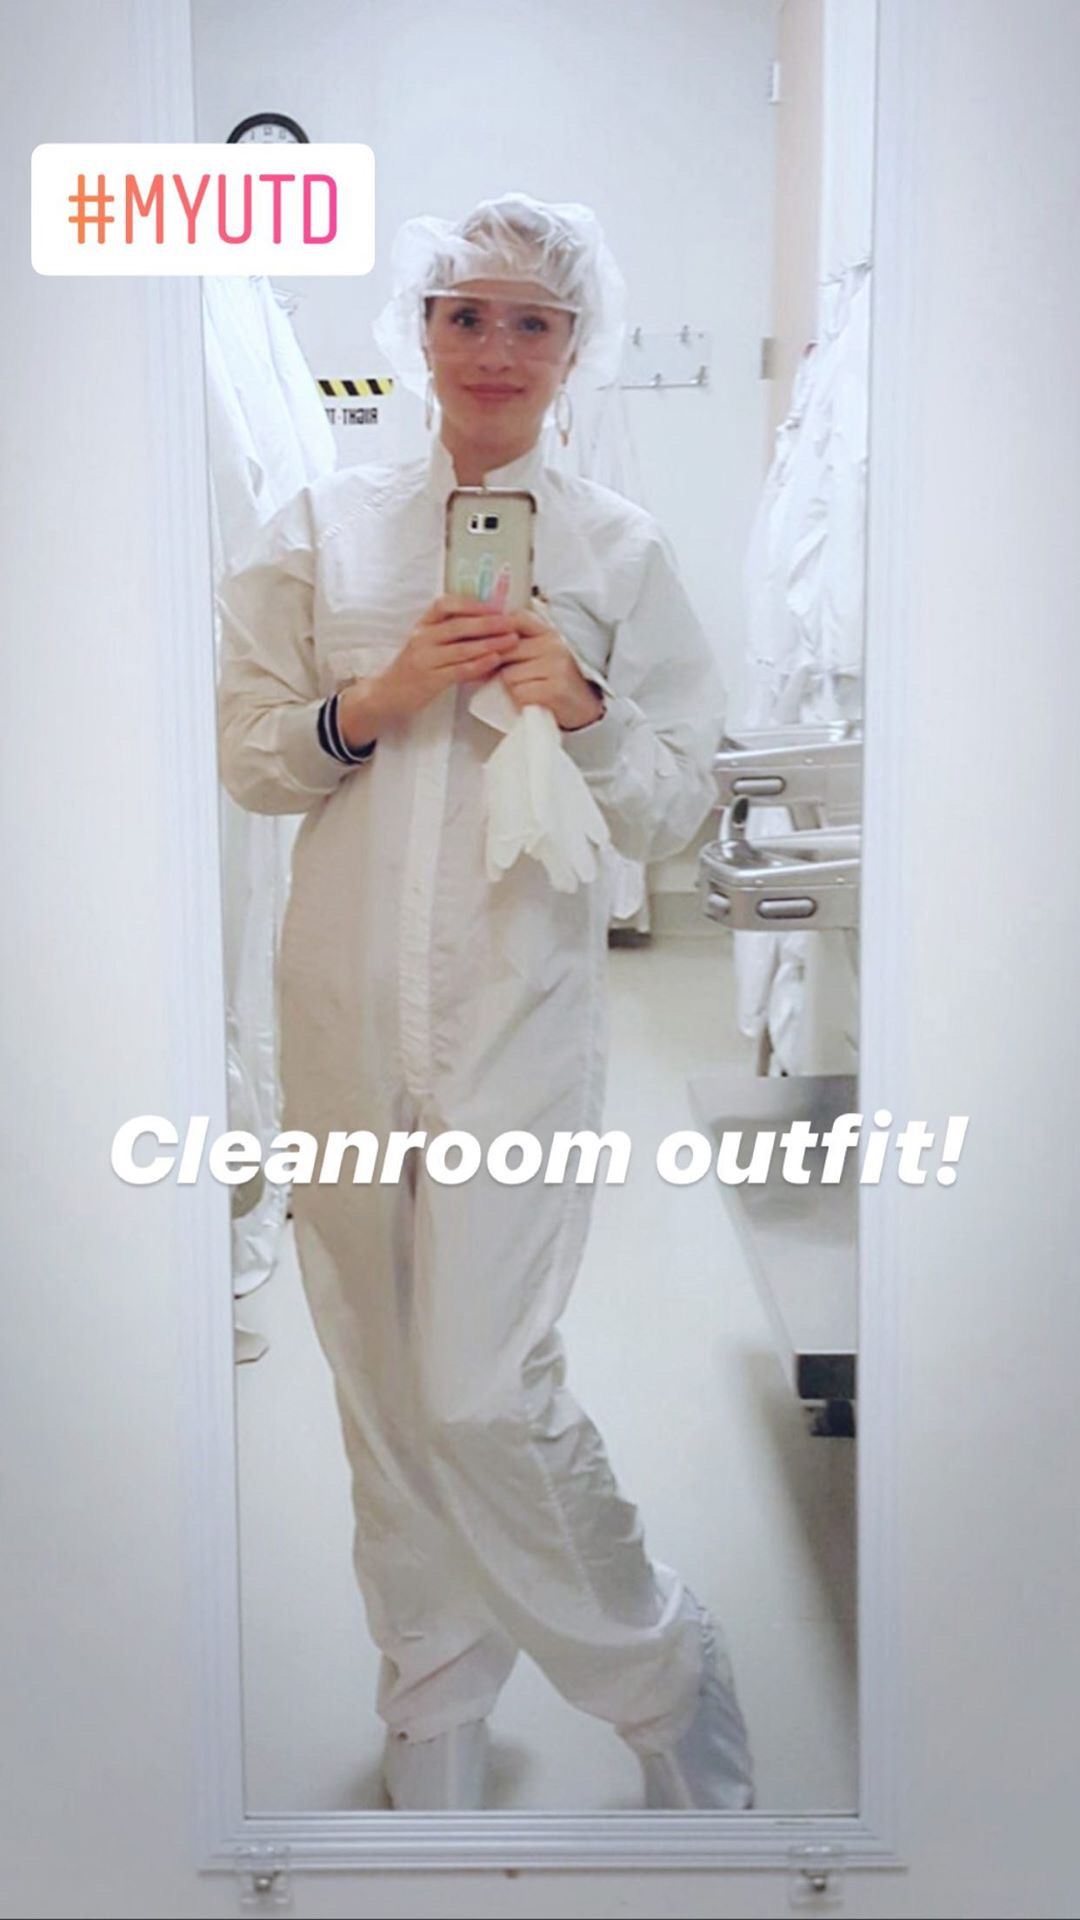 Patty is wearing a white jumpsuit, bonnet and shoe covers, and goggles. She's taking a selfie in a mirror.